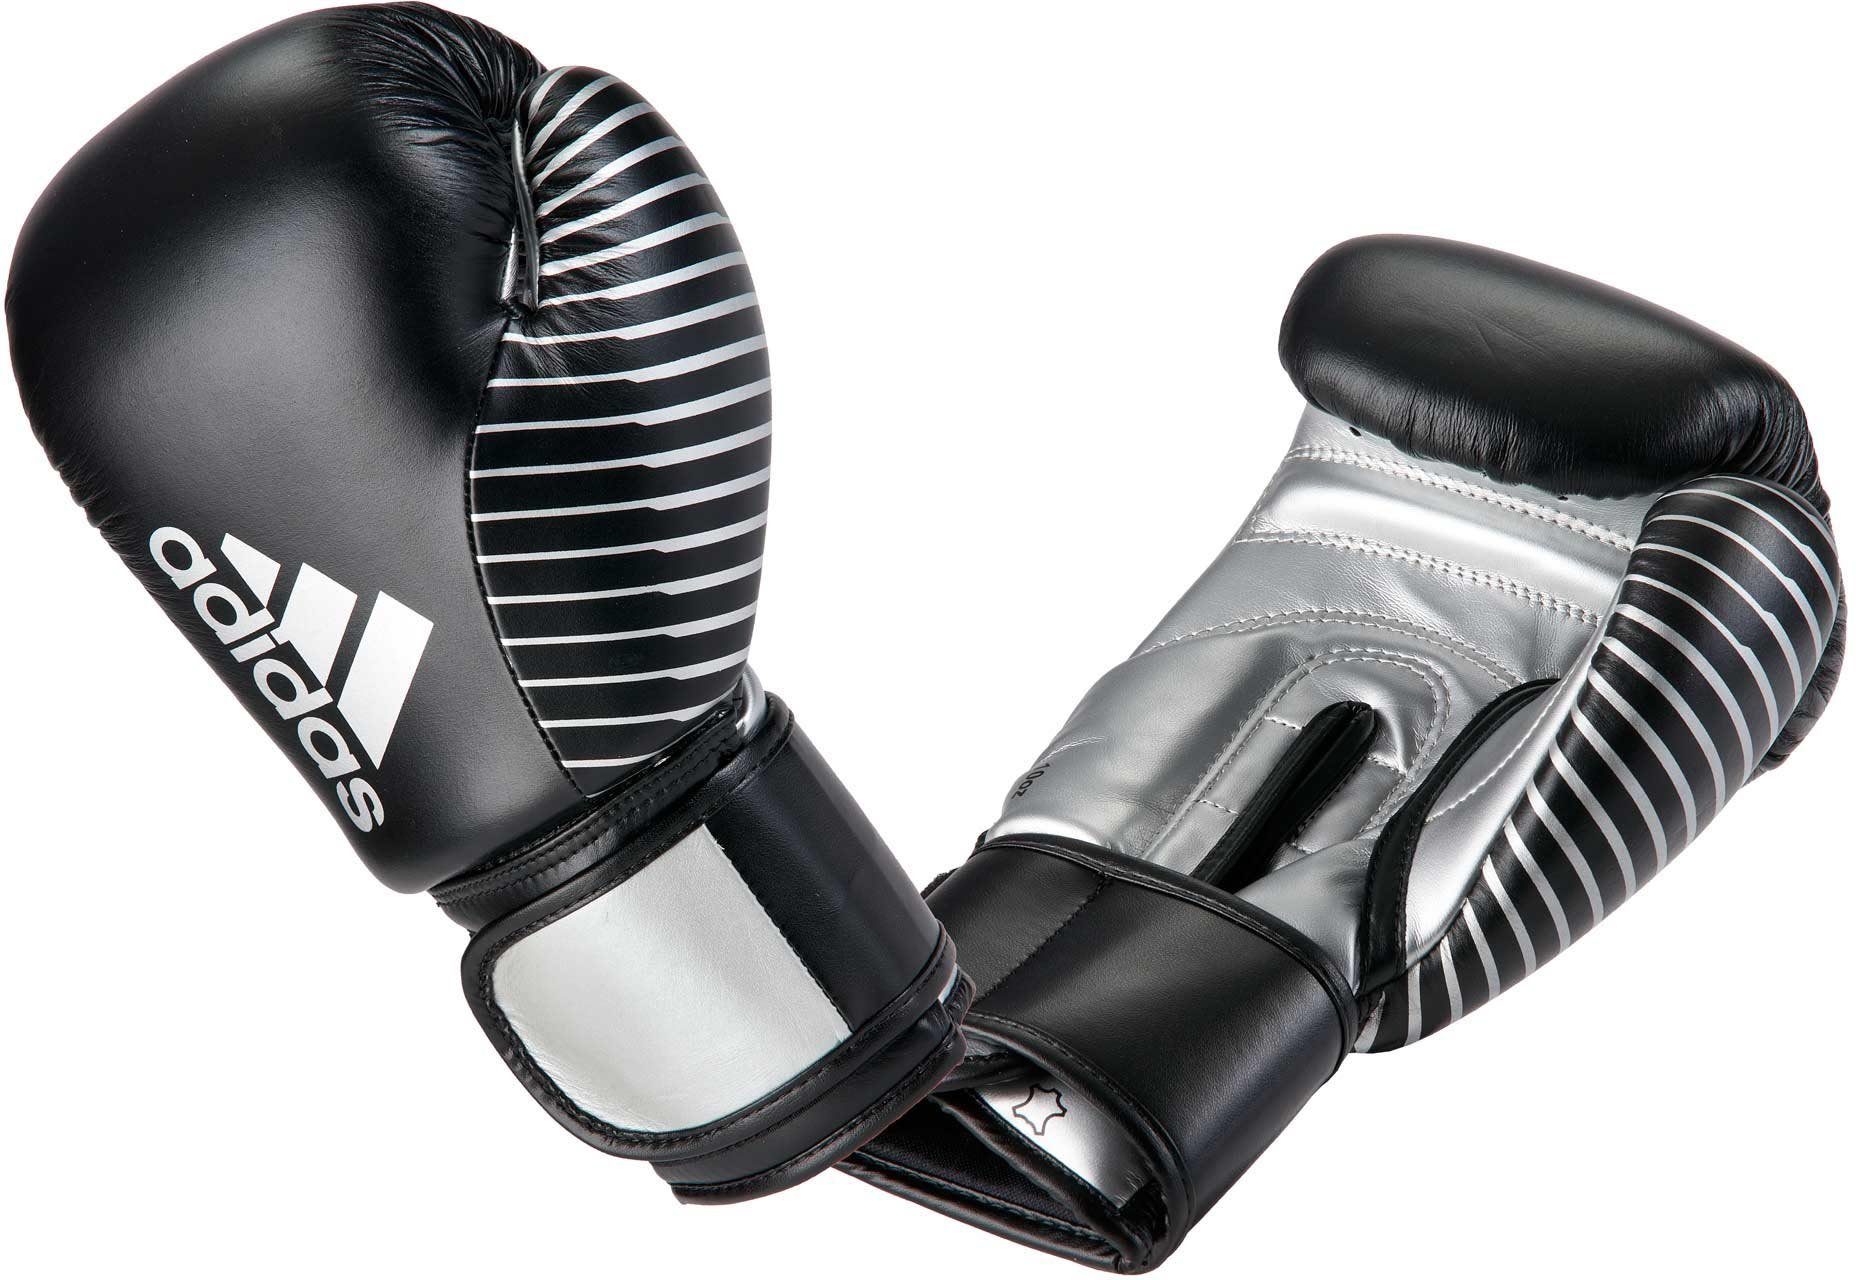 Competition Handschuh black/silver adidas Performance Boxhandschuhe